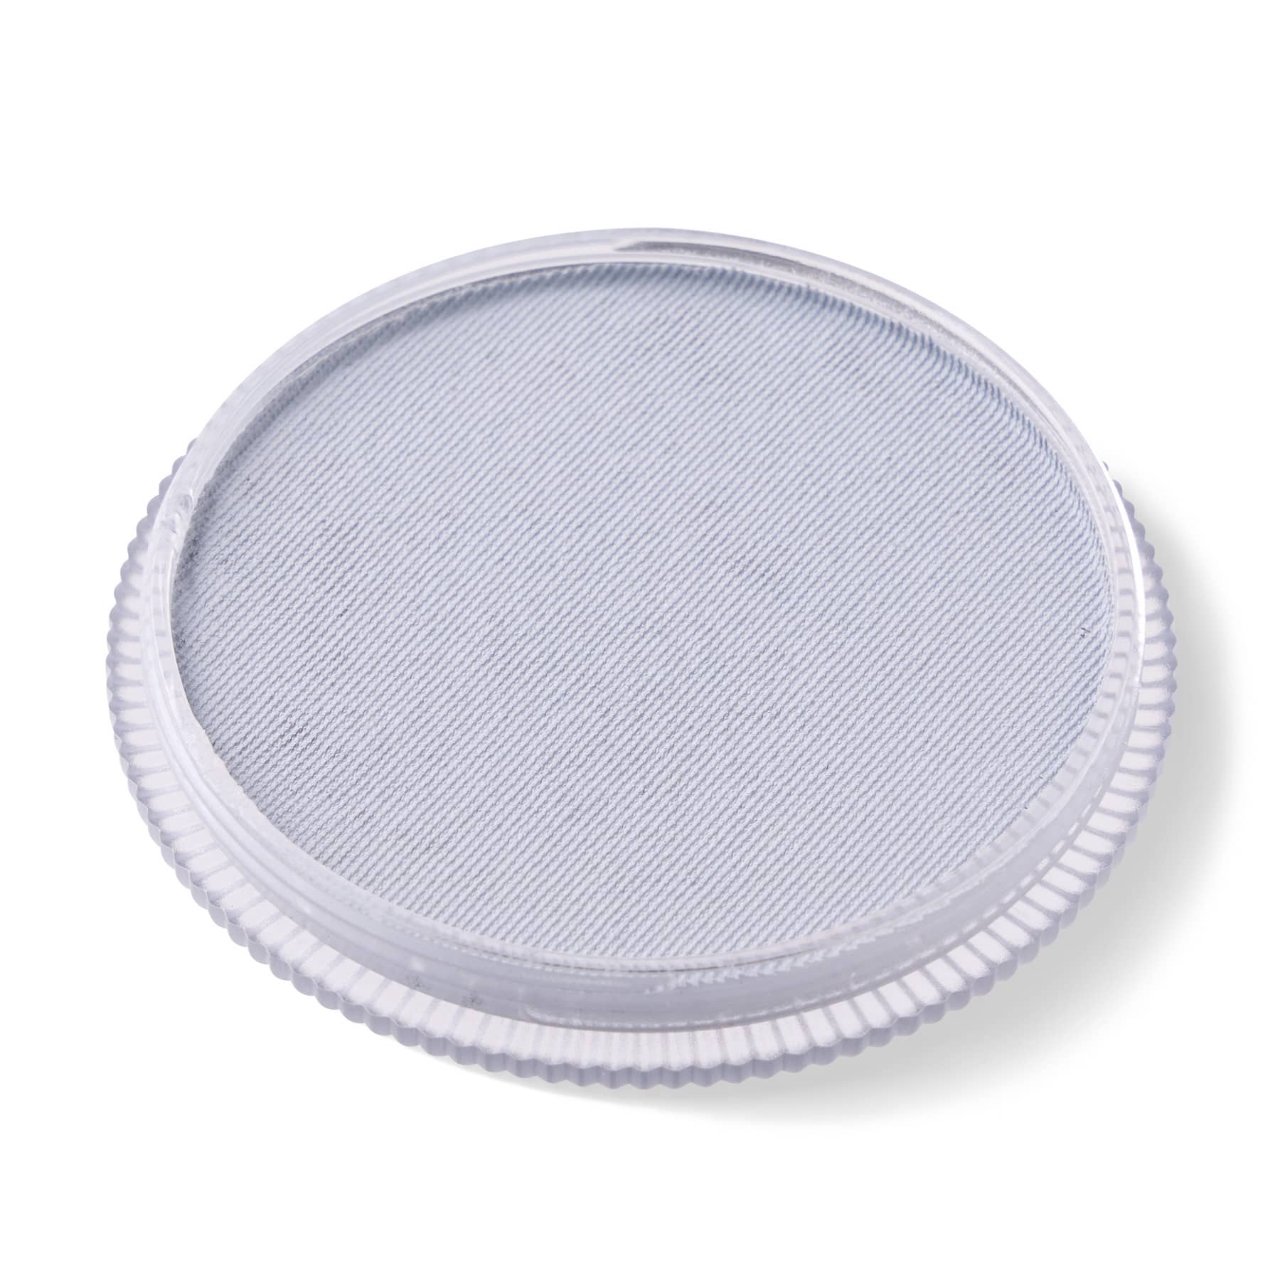 Picture of Global Blending Face Paint -  Pale Grey - 32g